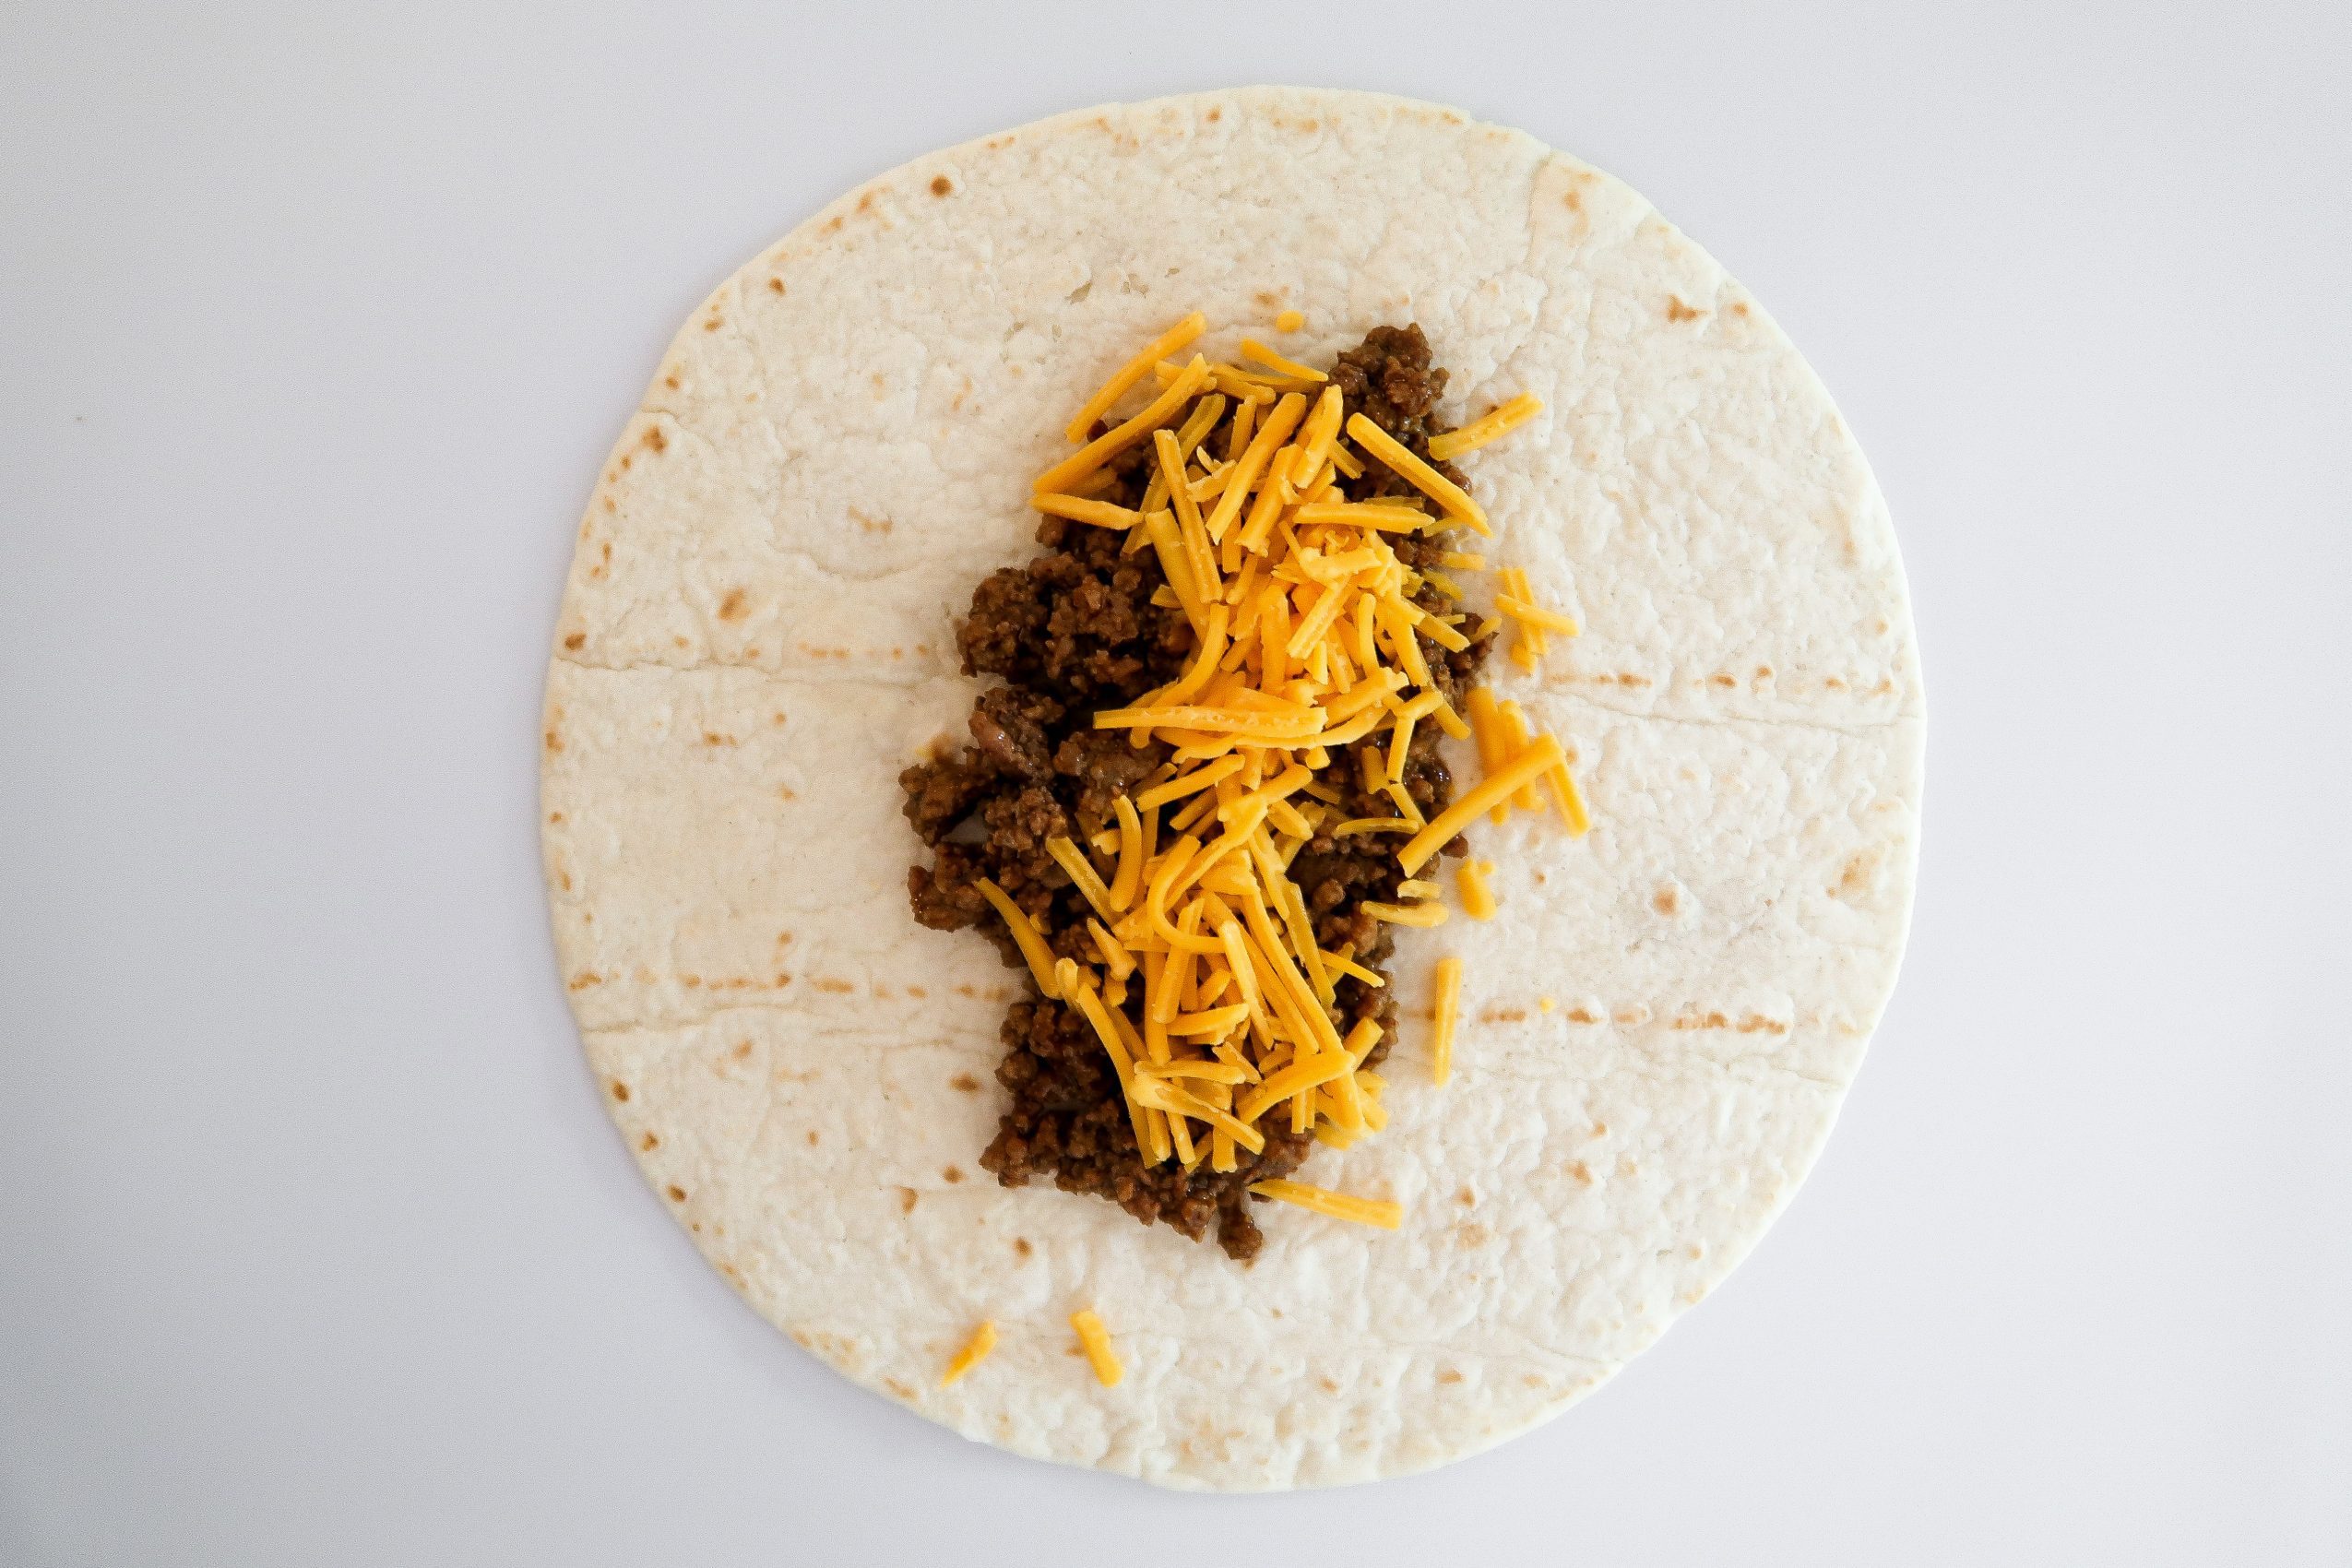 adding the taco meat and shredded cheese to soft shell